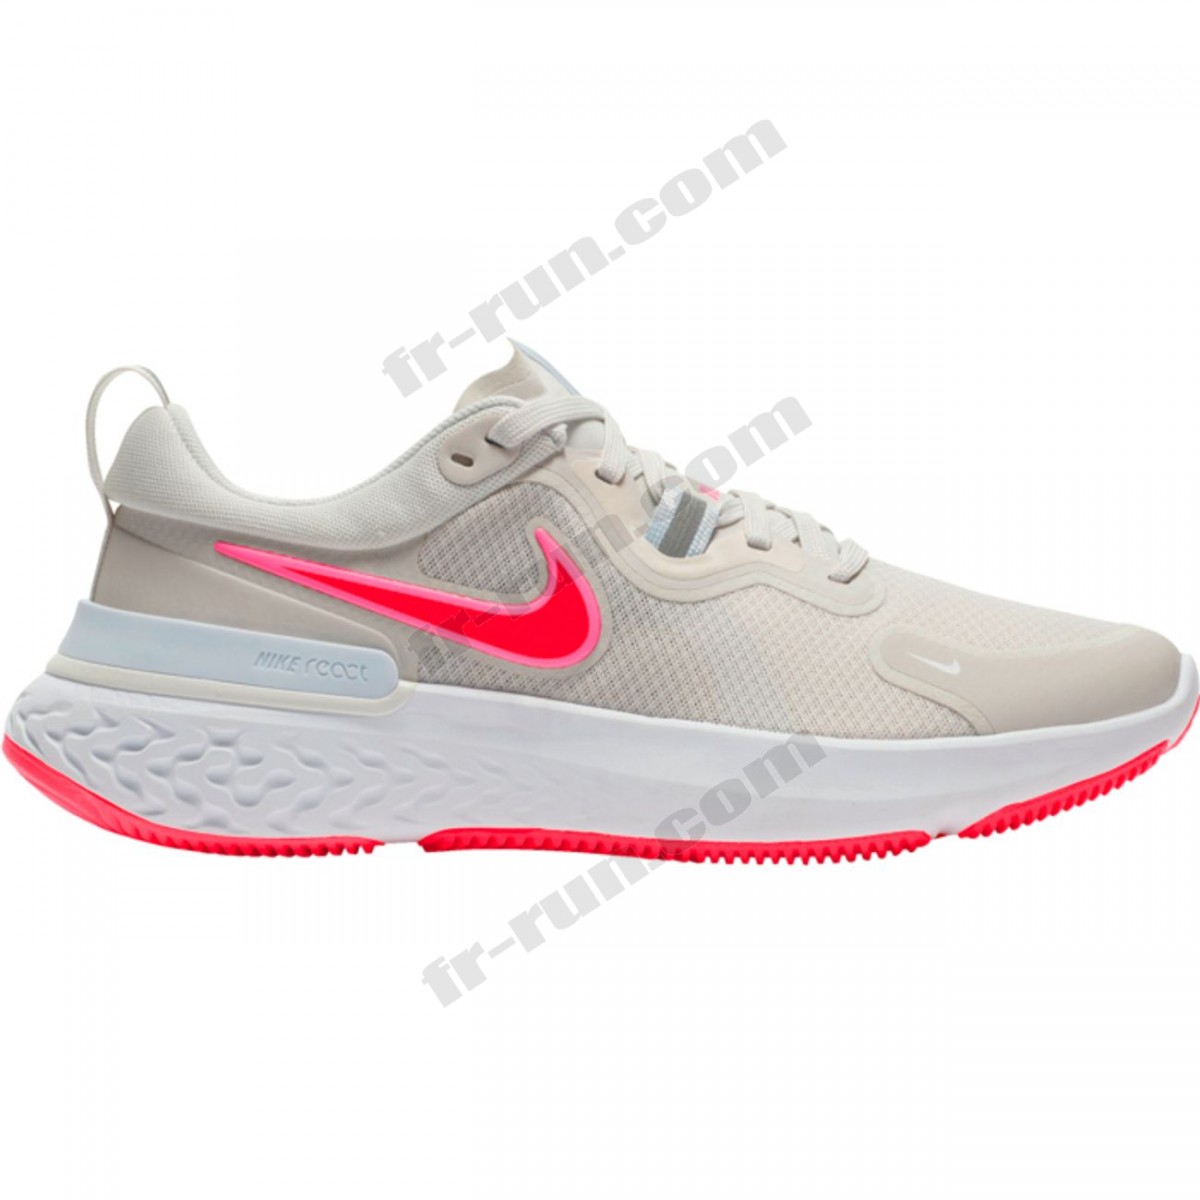 Nike/CHAUSSURES BASSES running femme NIKE WMNS NIKE REACT MILER √ Nouveau style √ Soldes - Nike/CHAUSSURES BASSES running femme NIKE WMNS NIKE REACT MILER √ Nouveau style √ Soldes